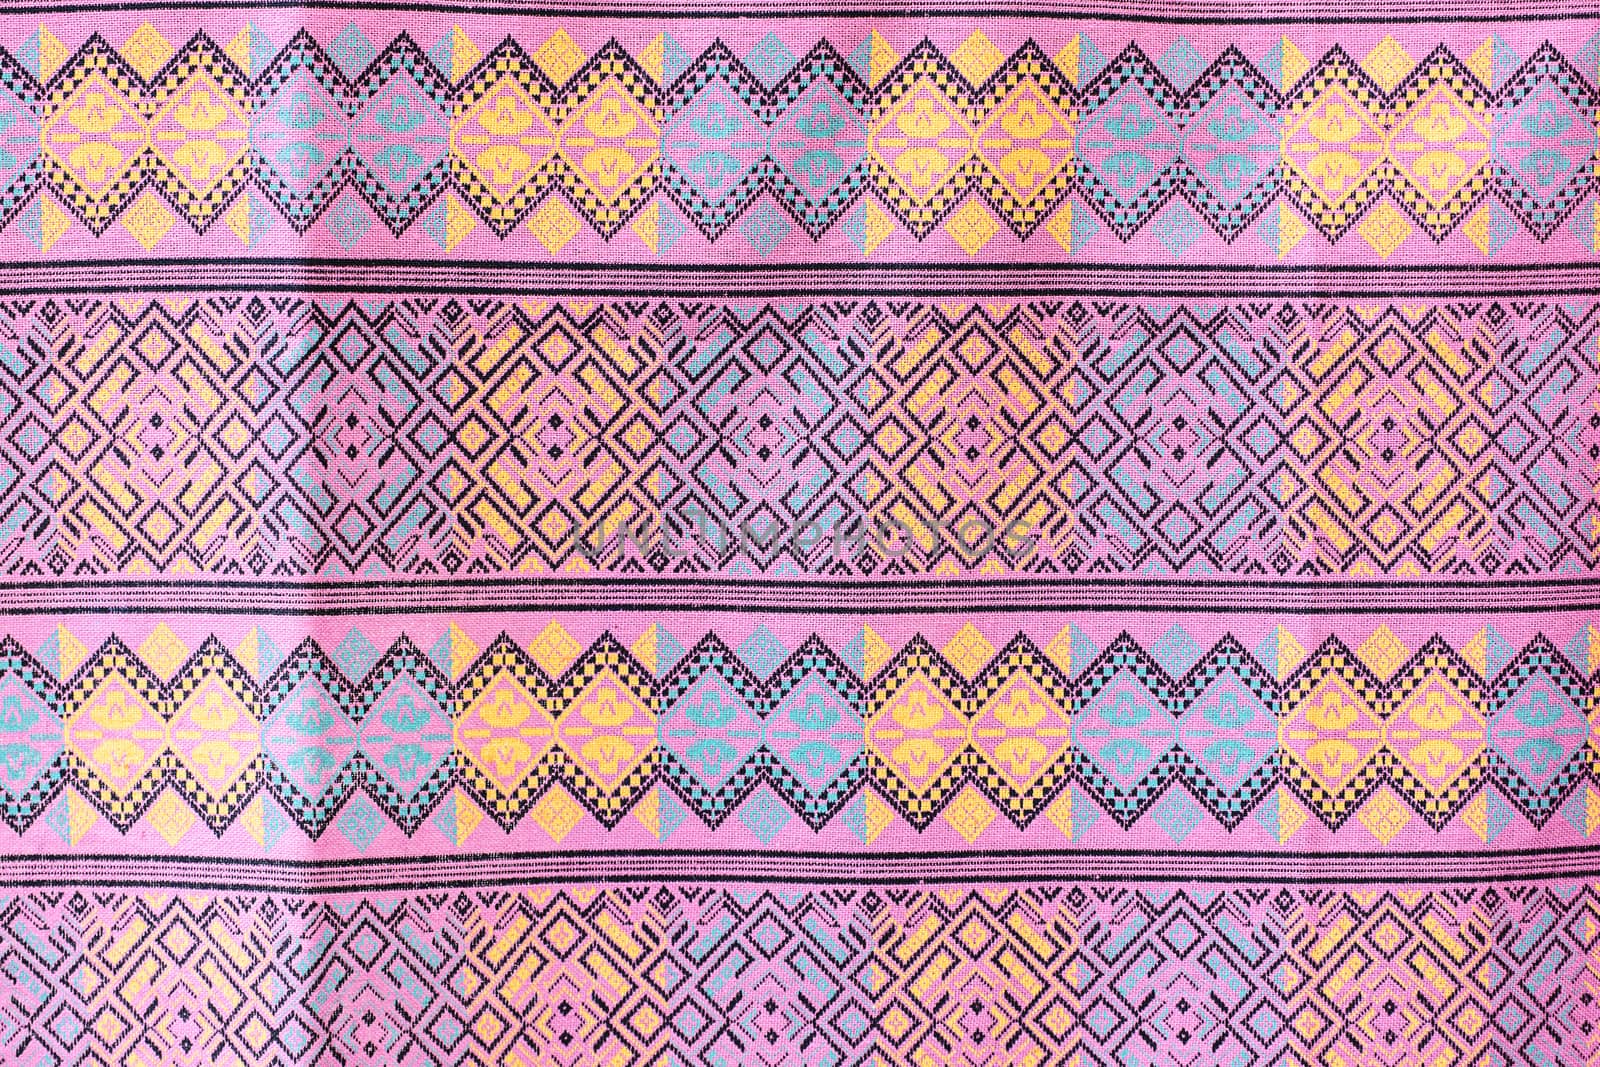 Sarong pattern by NuwatPhoto